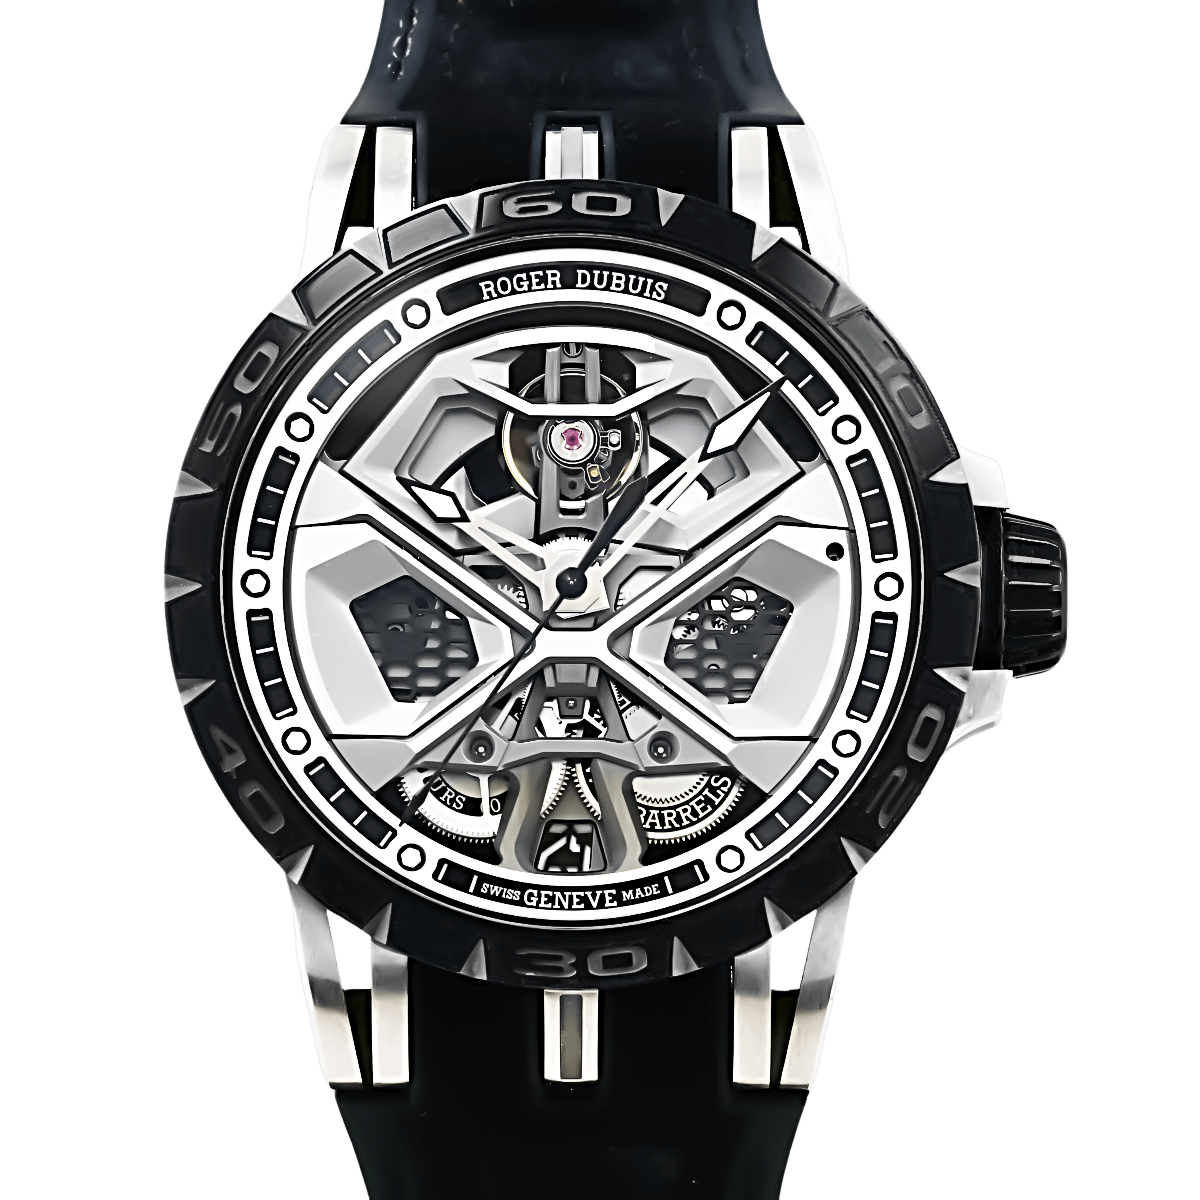 ROGER DUBUIS Excalibur Huracan Japan Limited Japan Limited 88 pieces RDDBEX0803